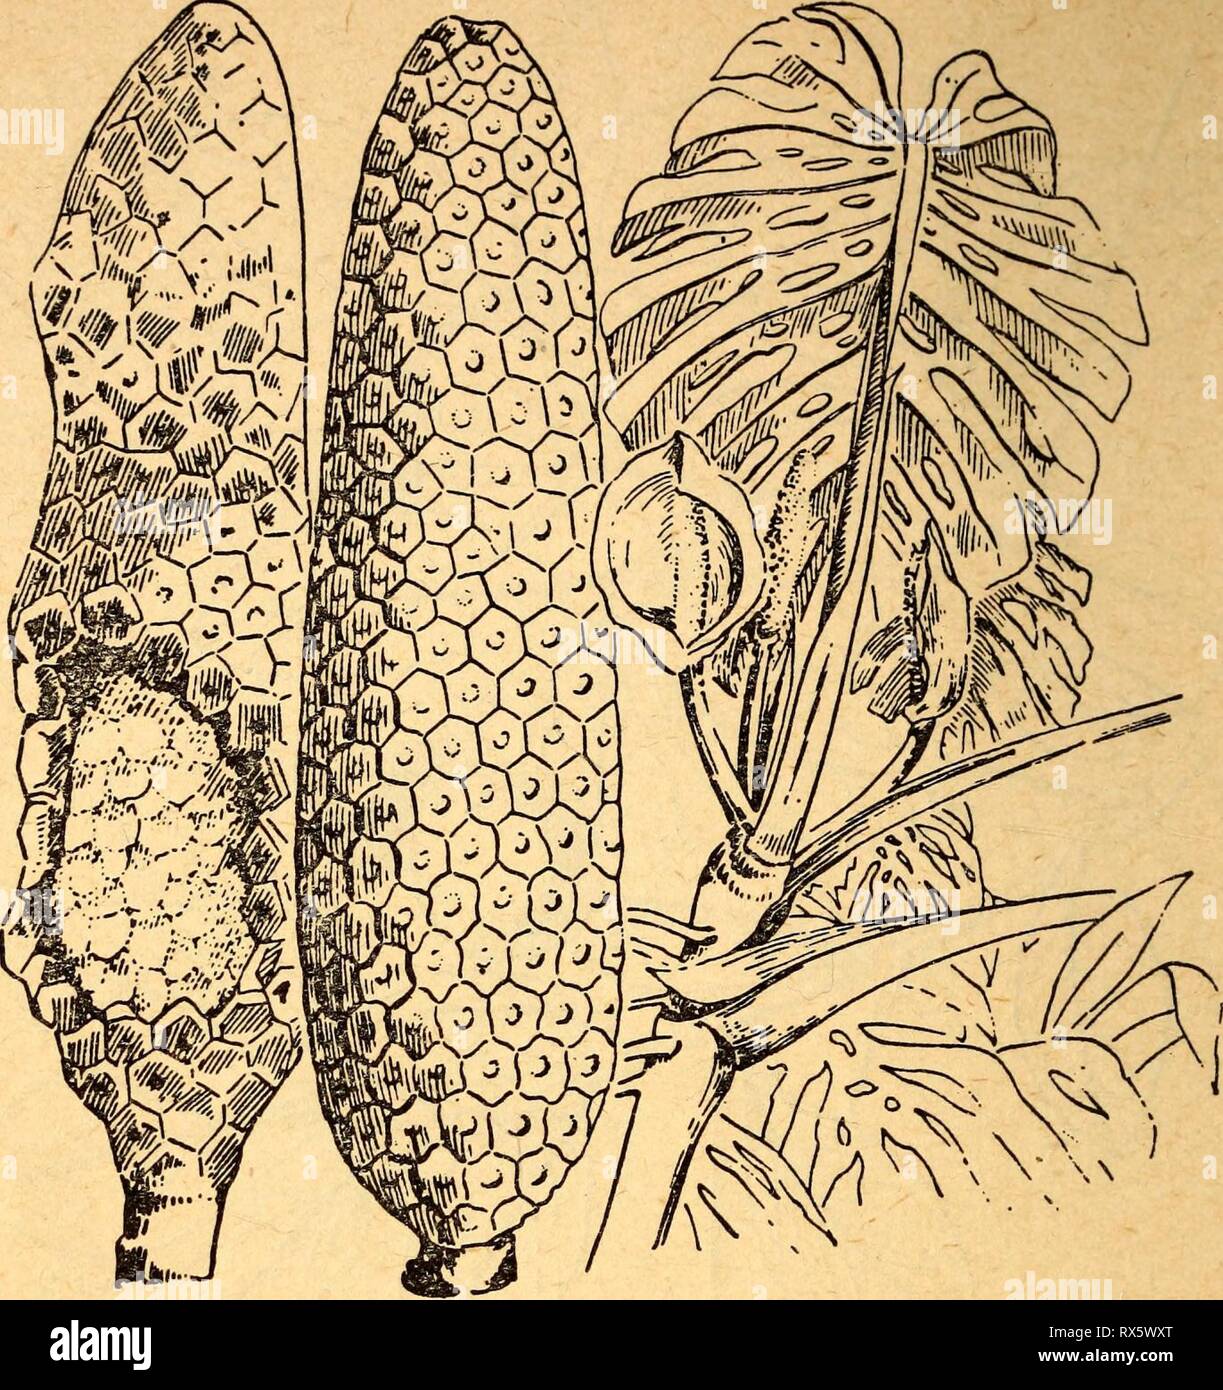 Edible and poisonous plants of Edible and poisonous plants of the Caribbean region ediblepoisonousp00dahl Year: 1944  30   21. Pi NAN ON A Monstera deliciosa The fruit of the pifianona vine is good to eat raw only when fully ripe. Caution: The immature fruit contains needlelike crystals that irritate the mouth. The large green fruit is the size and shape of a corncob. When the small, six-cornered scales begin to drop off the fruit and the deep green color lightens, it is a sure sign of ripeness. The stem of the plant may be placed in water to hasten ripening. This evergreen plant, a native of  Stock Photo